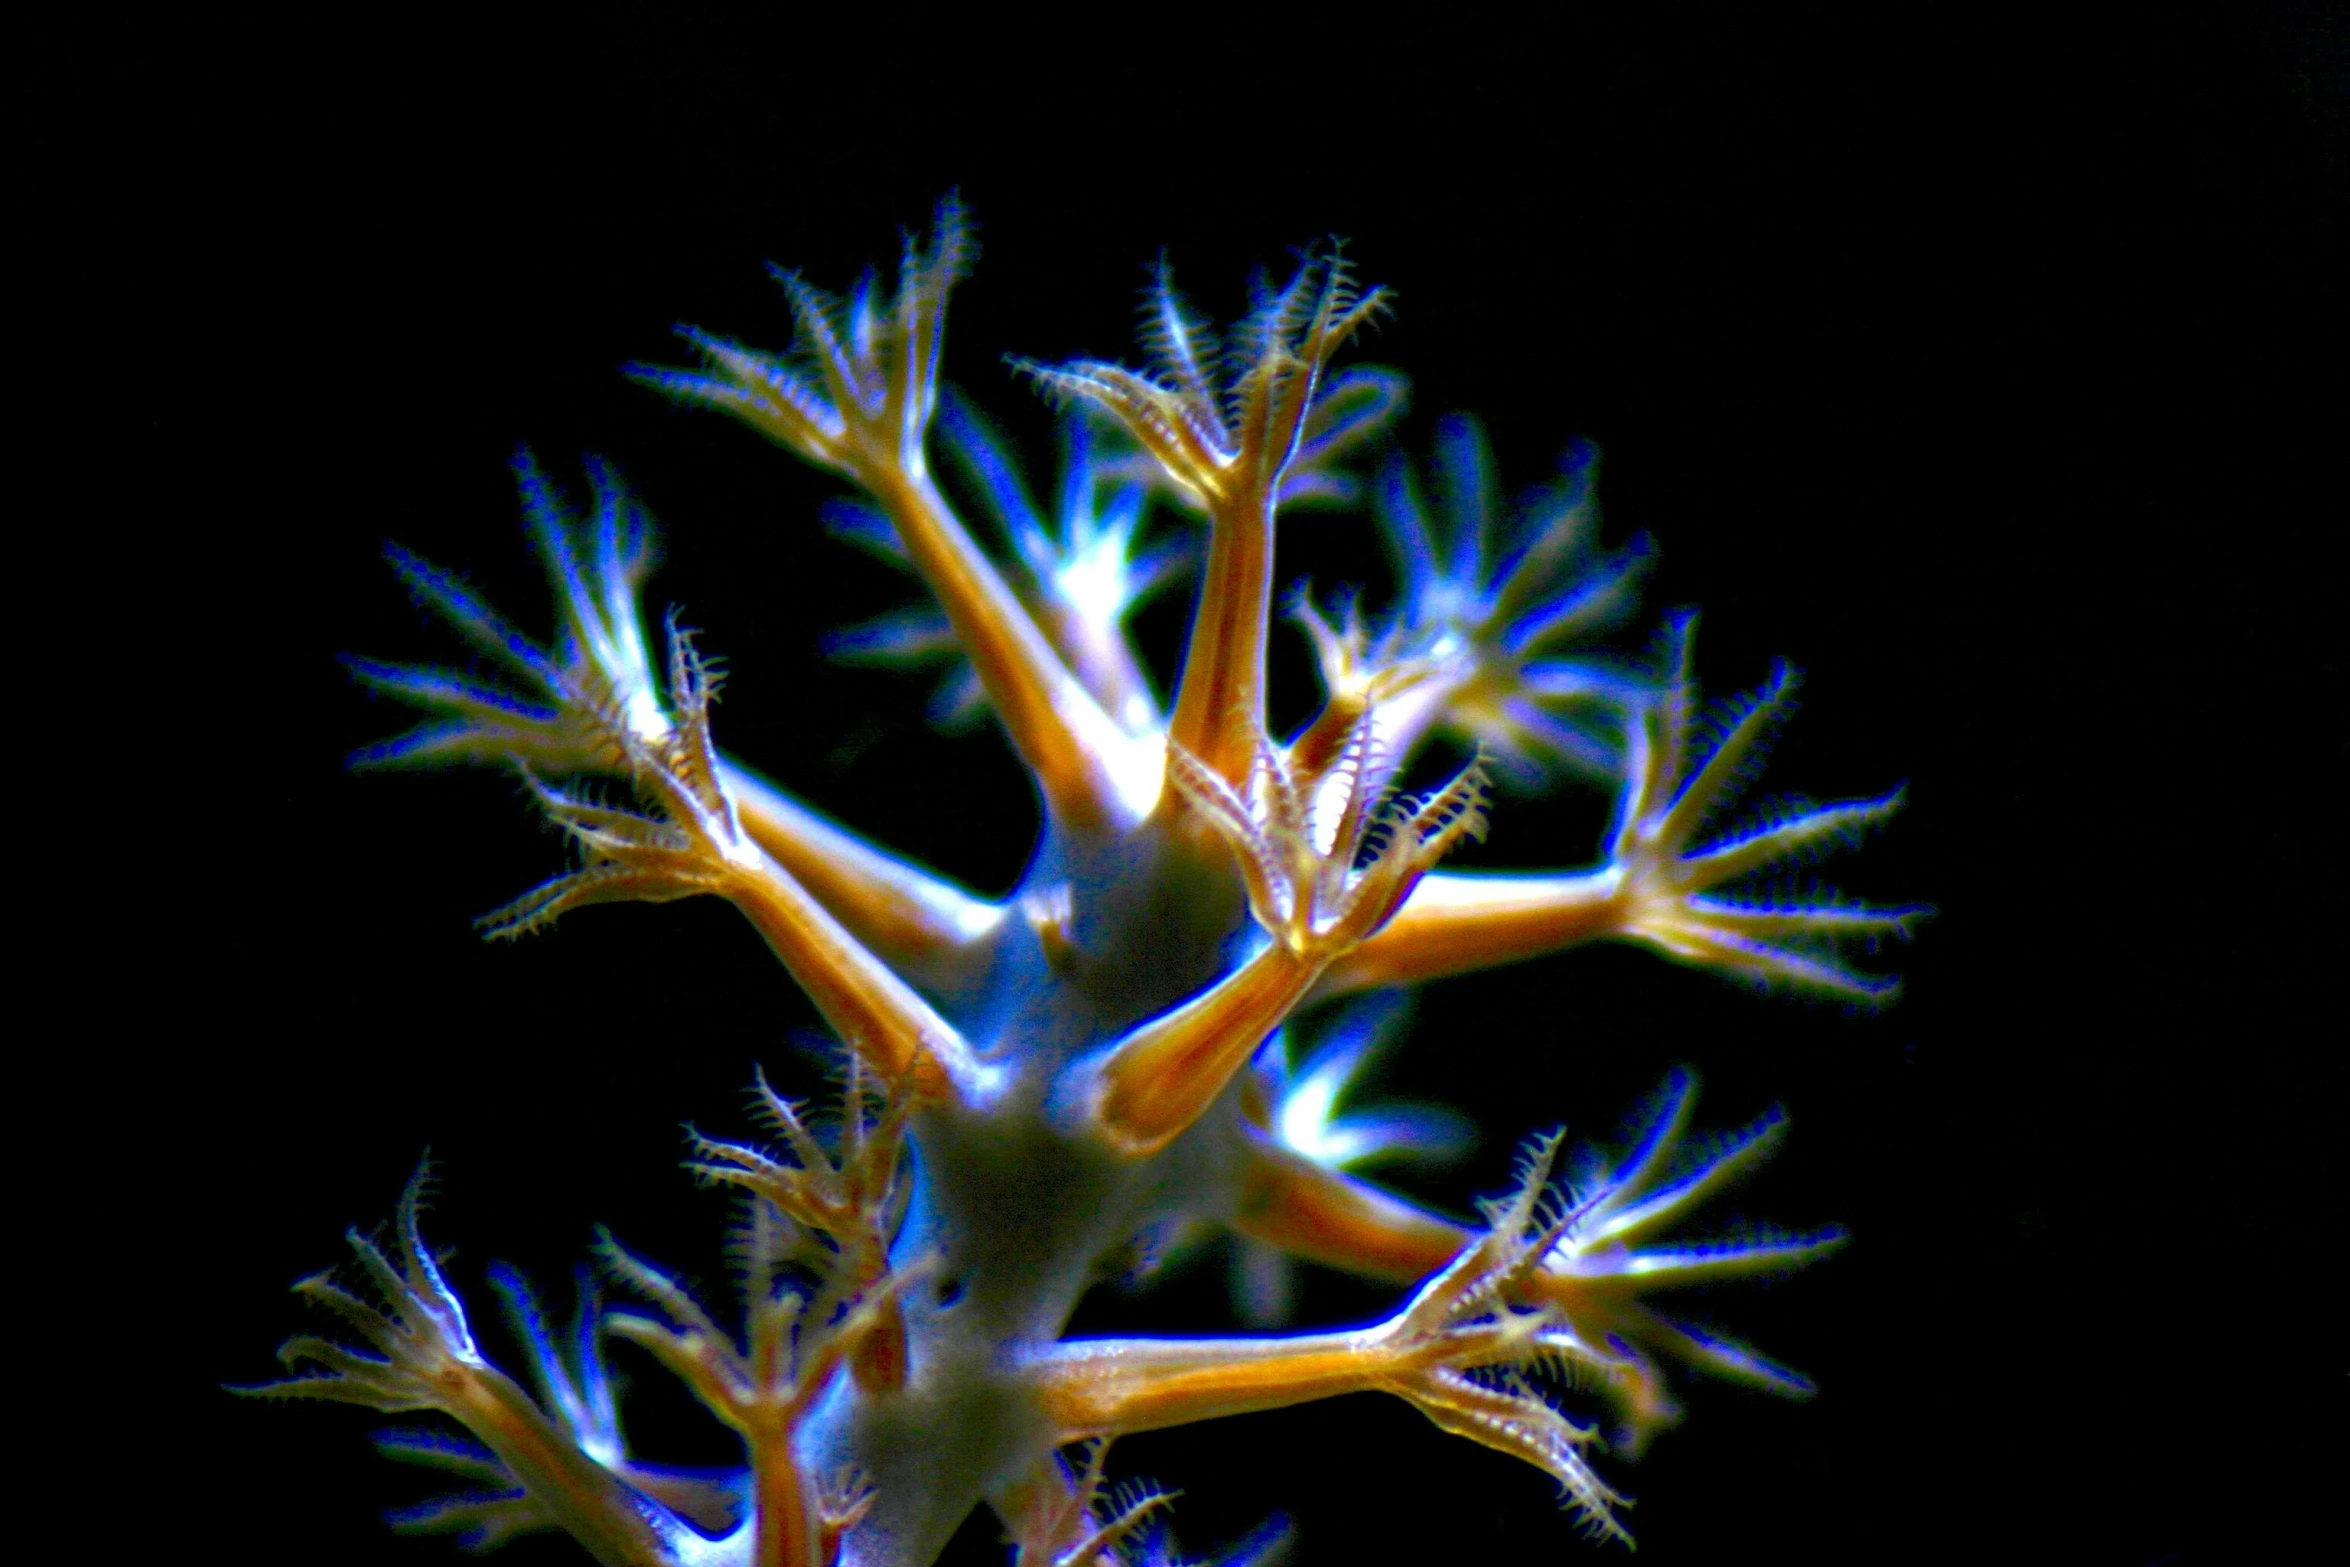 a close up of a plant with no leaves, a microscopic photo, flickr, delicate coral sea bottom, lit from below, resembling a crown, twirling glowing sea plants